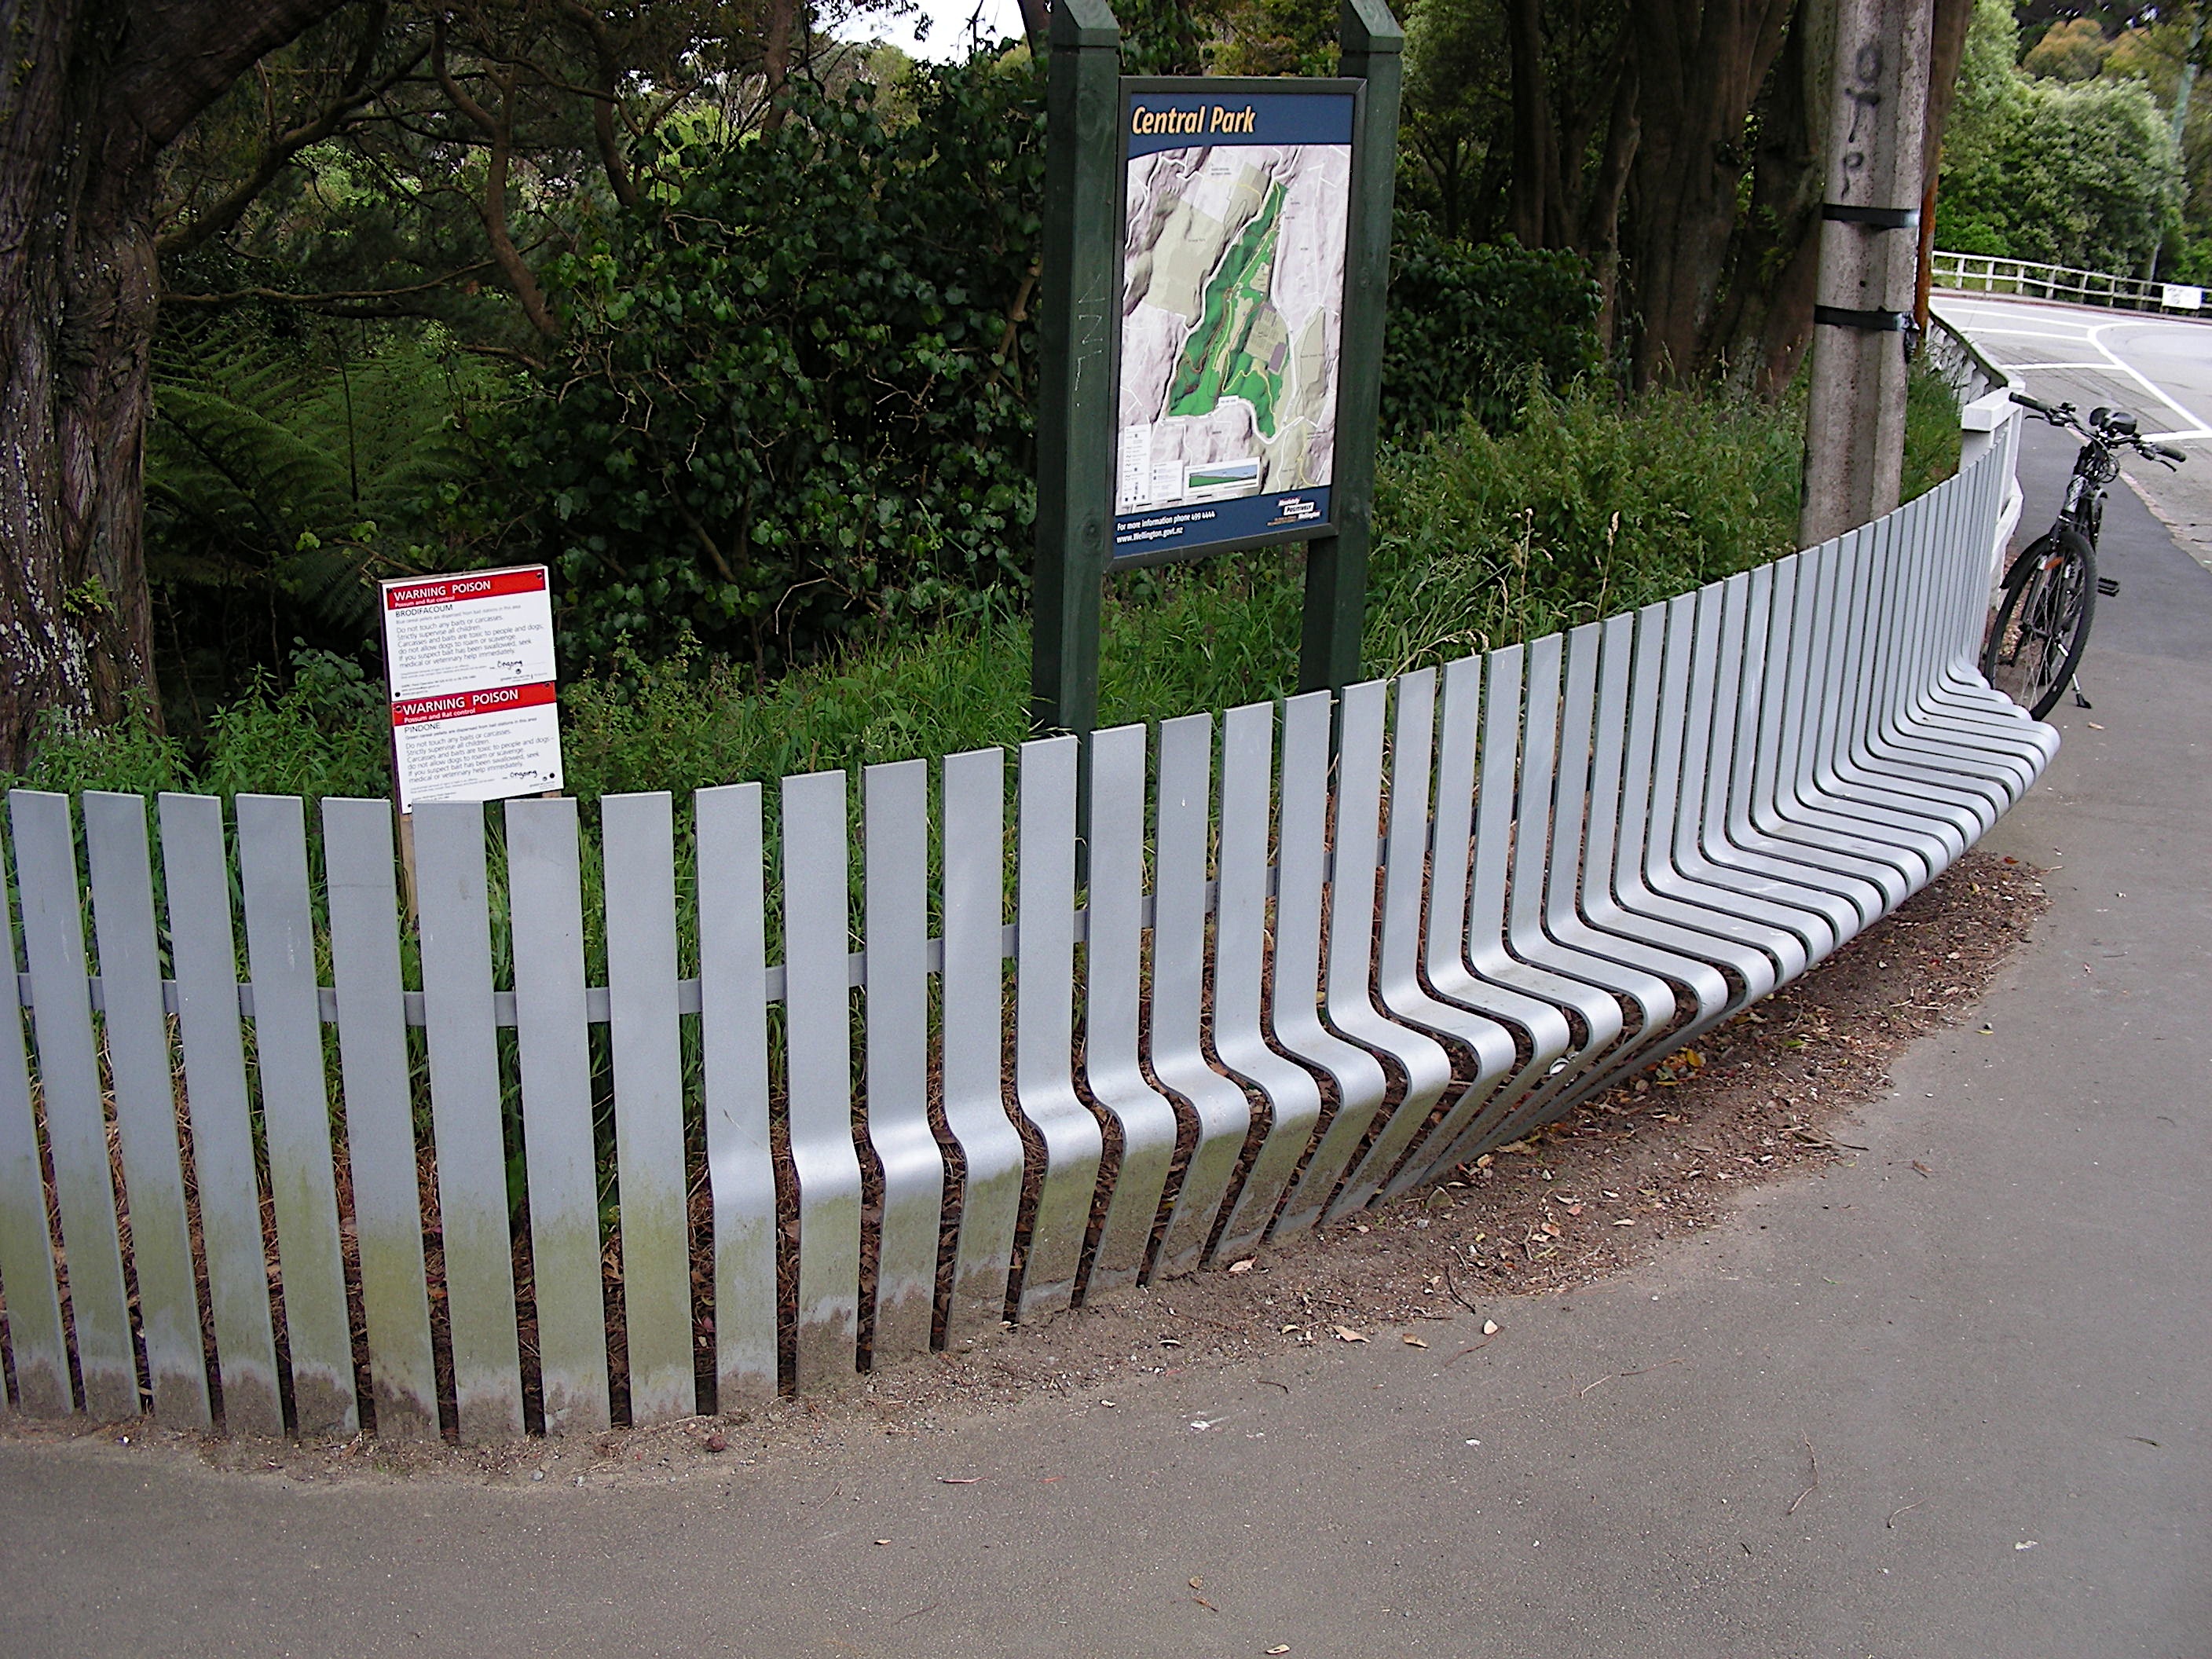 File:Fence bench (8216597616).jpg - Wikimedia Commons